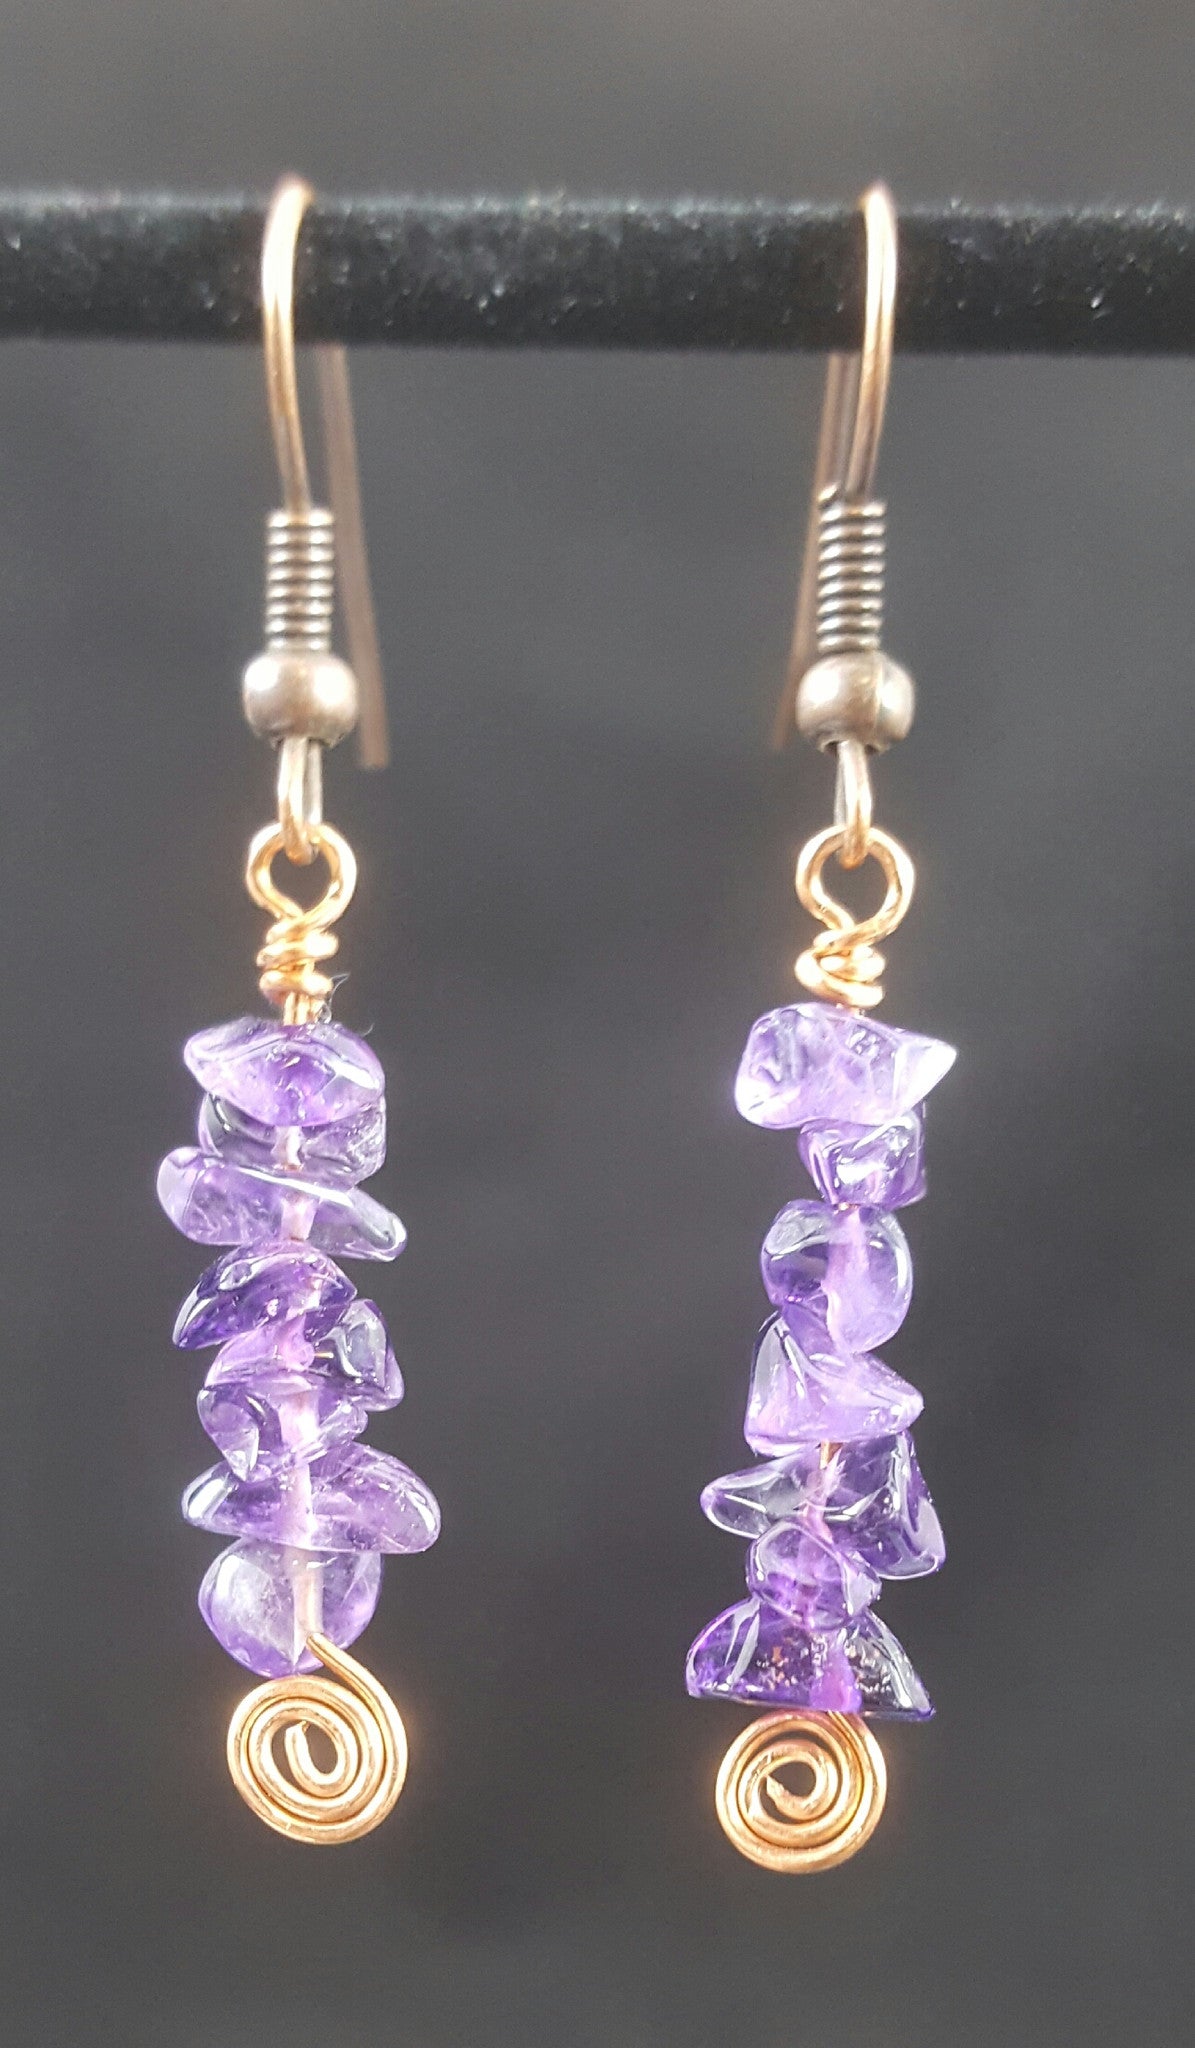 Copper Earrings with Amethyst Stone Chips